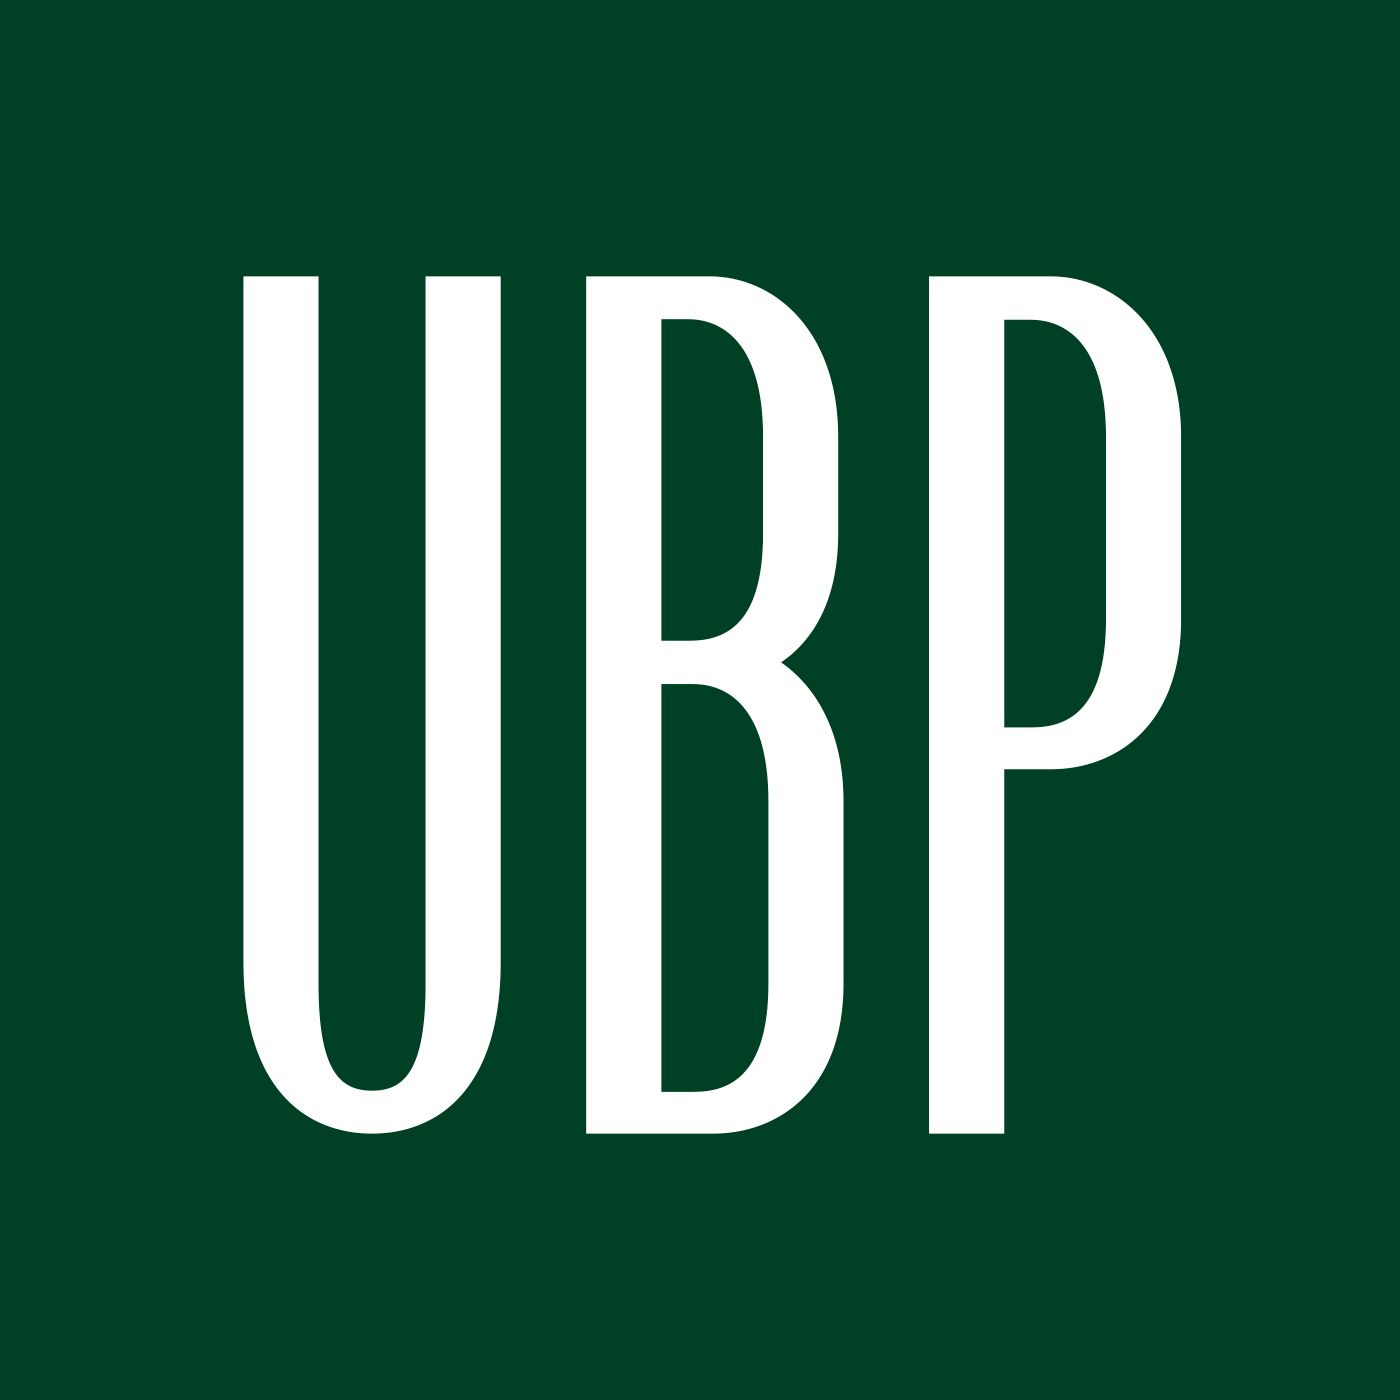 UBP Podcasts